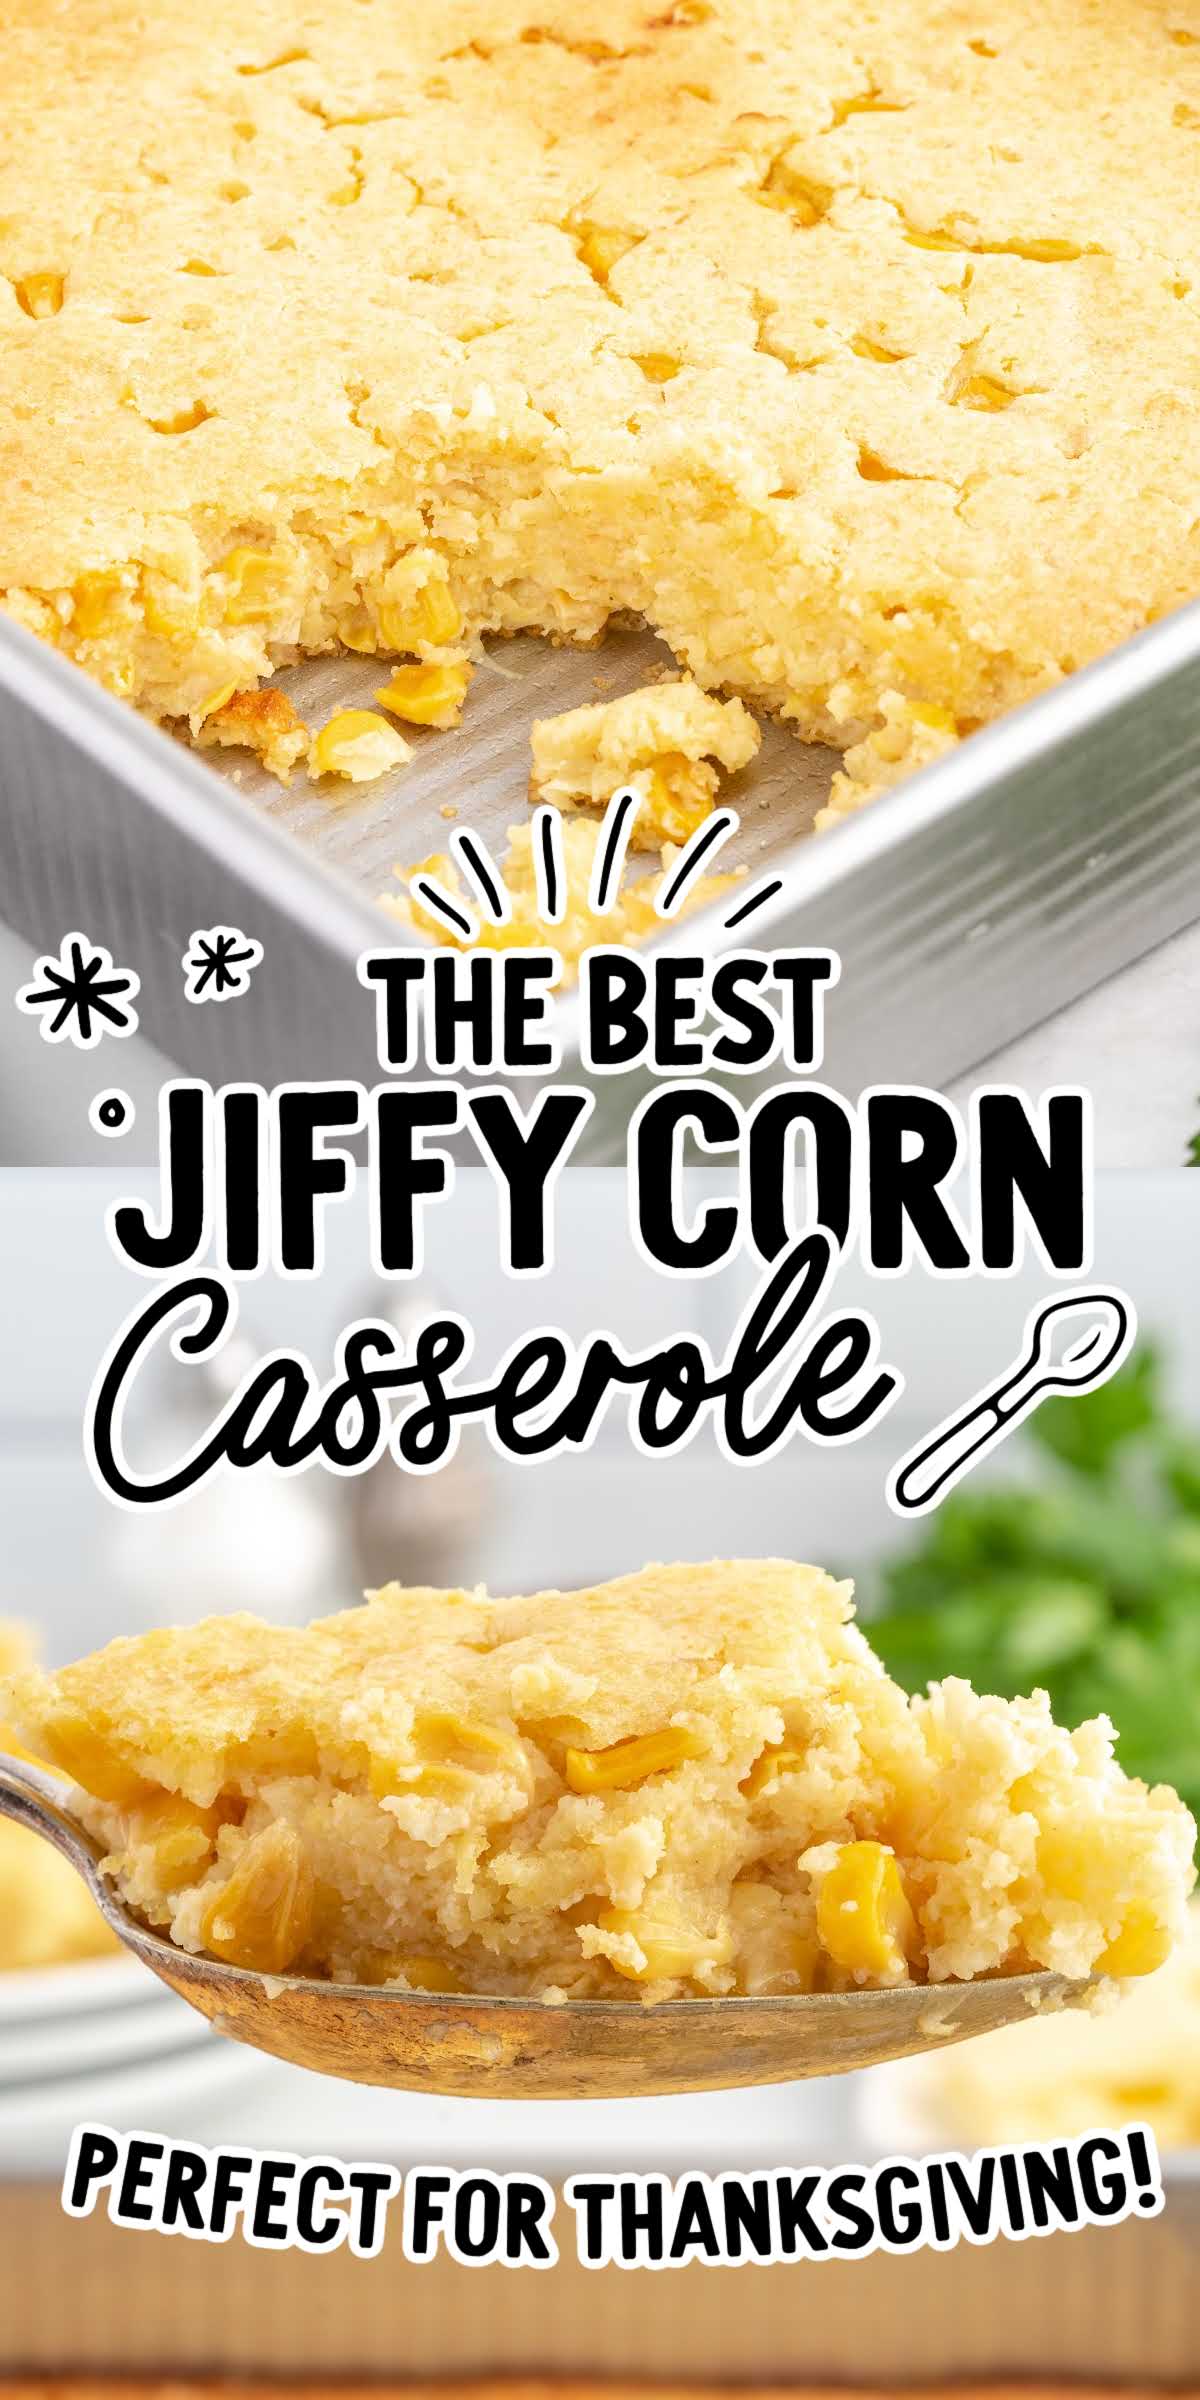 Jiffy Corn Pudding Casserole - Spaceships and Laser Beams